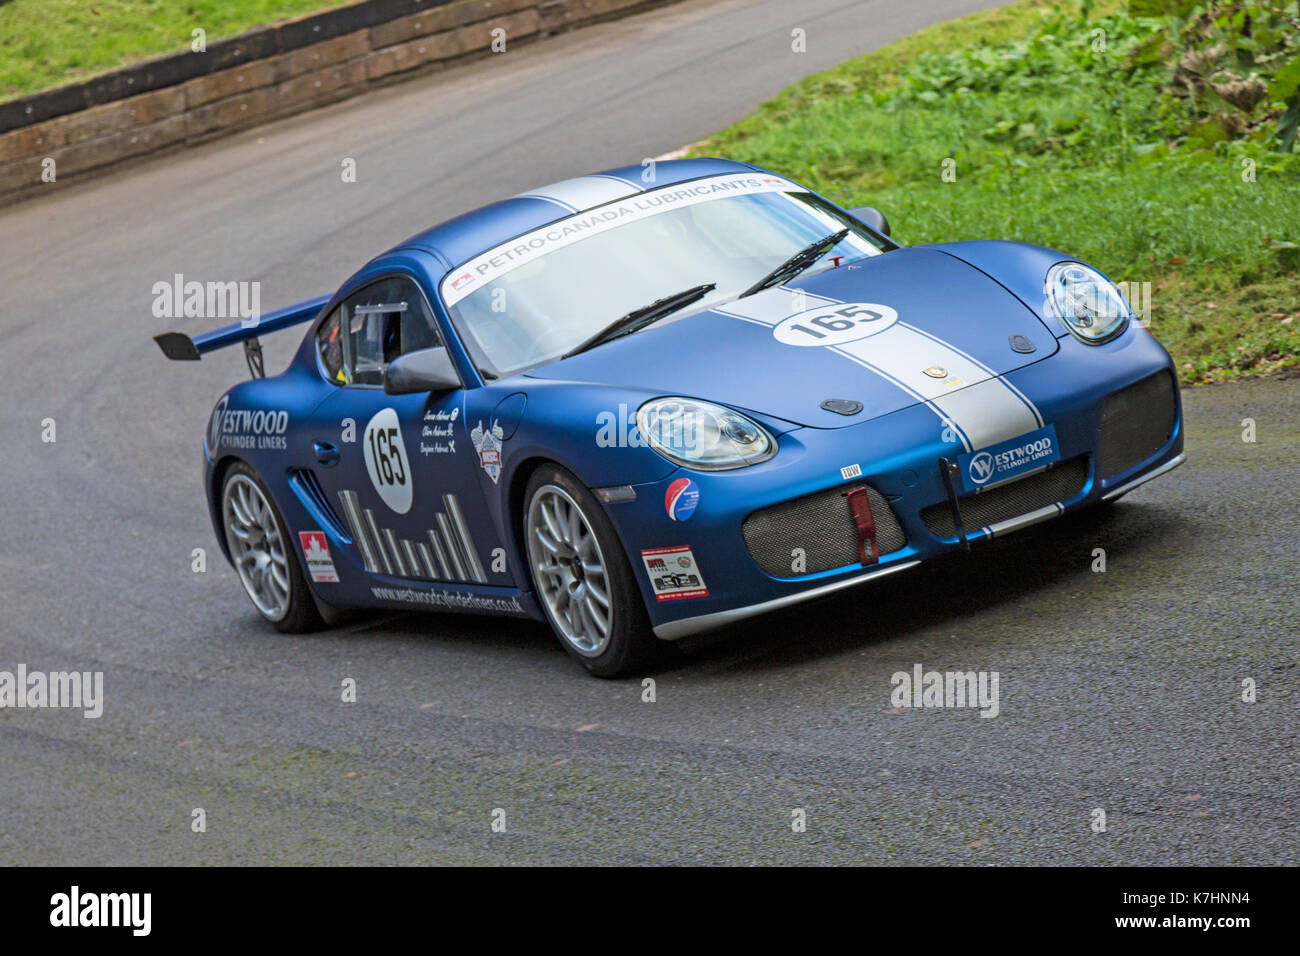 Worcestershire, UK. 16th September, 2017. A Porsche Cayman being raced by Duncan Andrews at the Autumn Speed Finale at Shelsley Walsh in worcestershire, England, on Saturday 16th September. Credit: Rob Carter/Alamy Live News Stock Photo